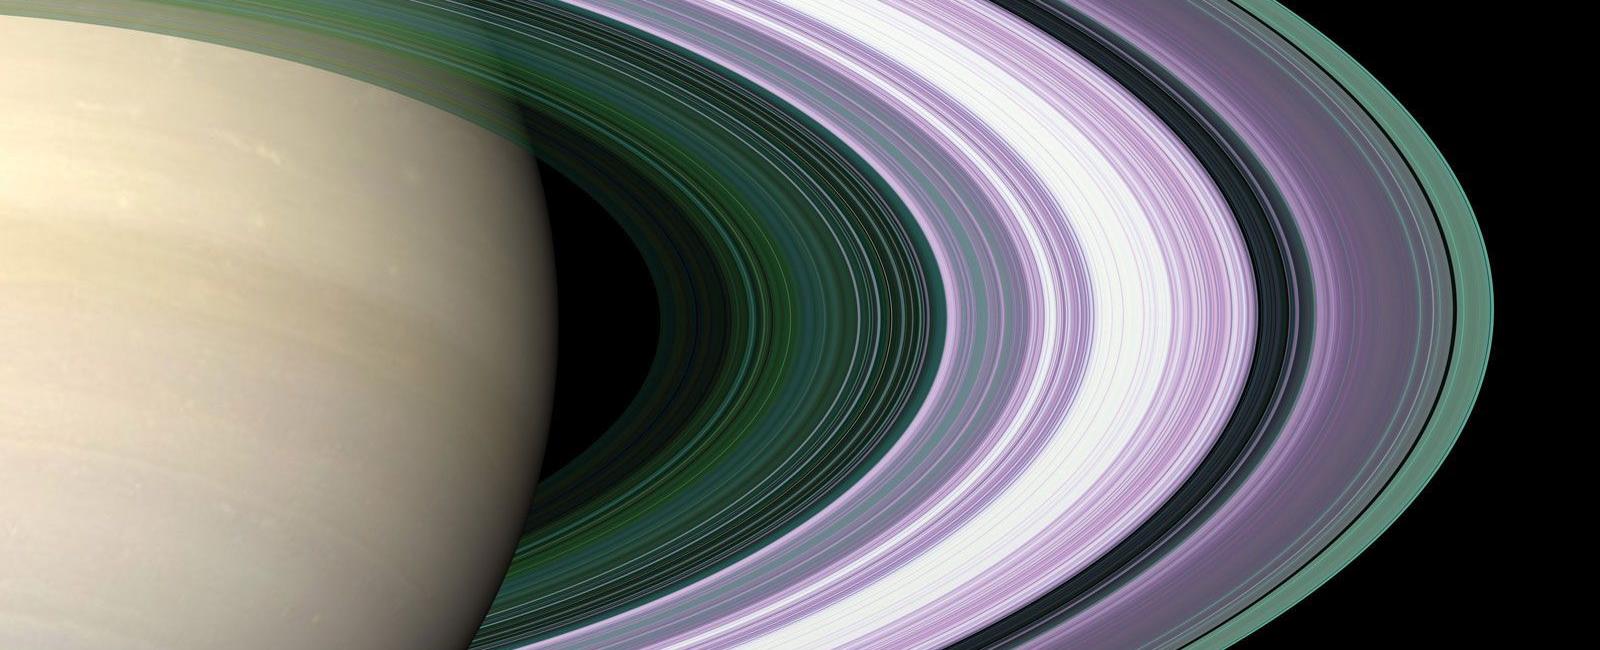 Saturn s ring system extends outwards 175 000 miles 282 000 kilometers but the individual rings are only around 30 feet 10 meters high when measured vertically